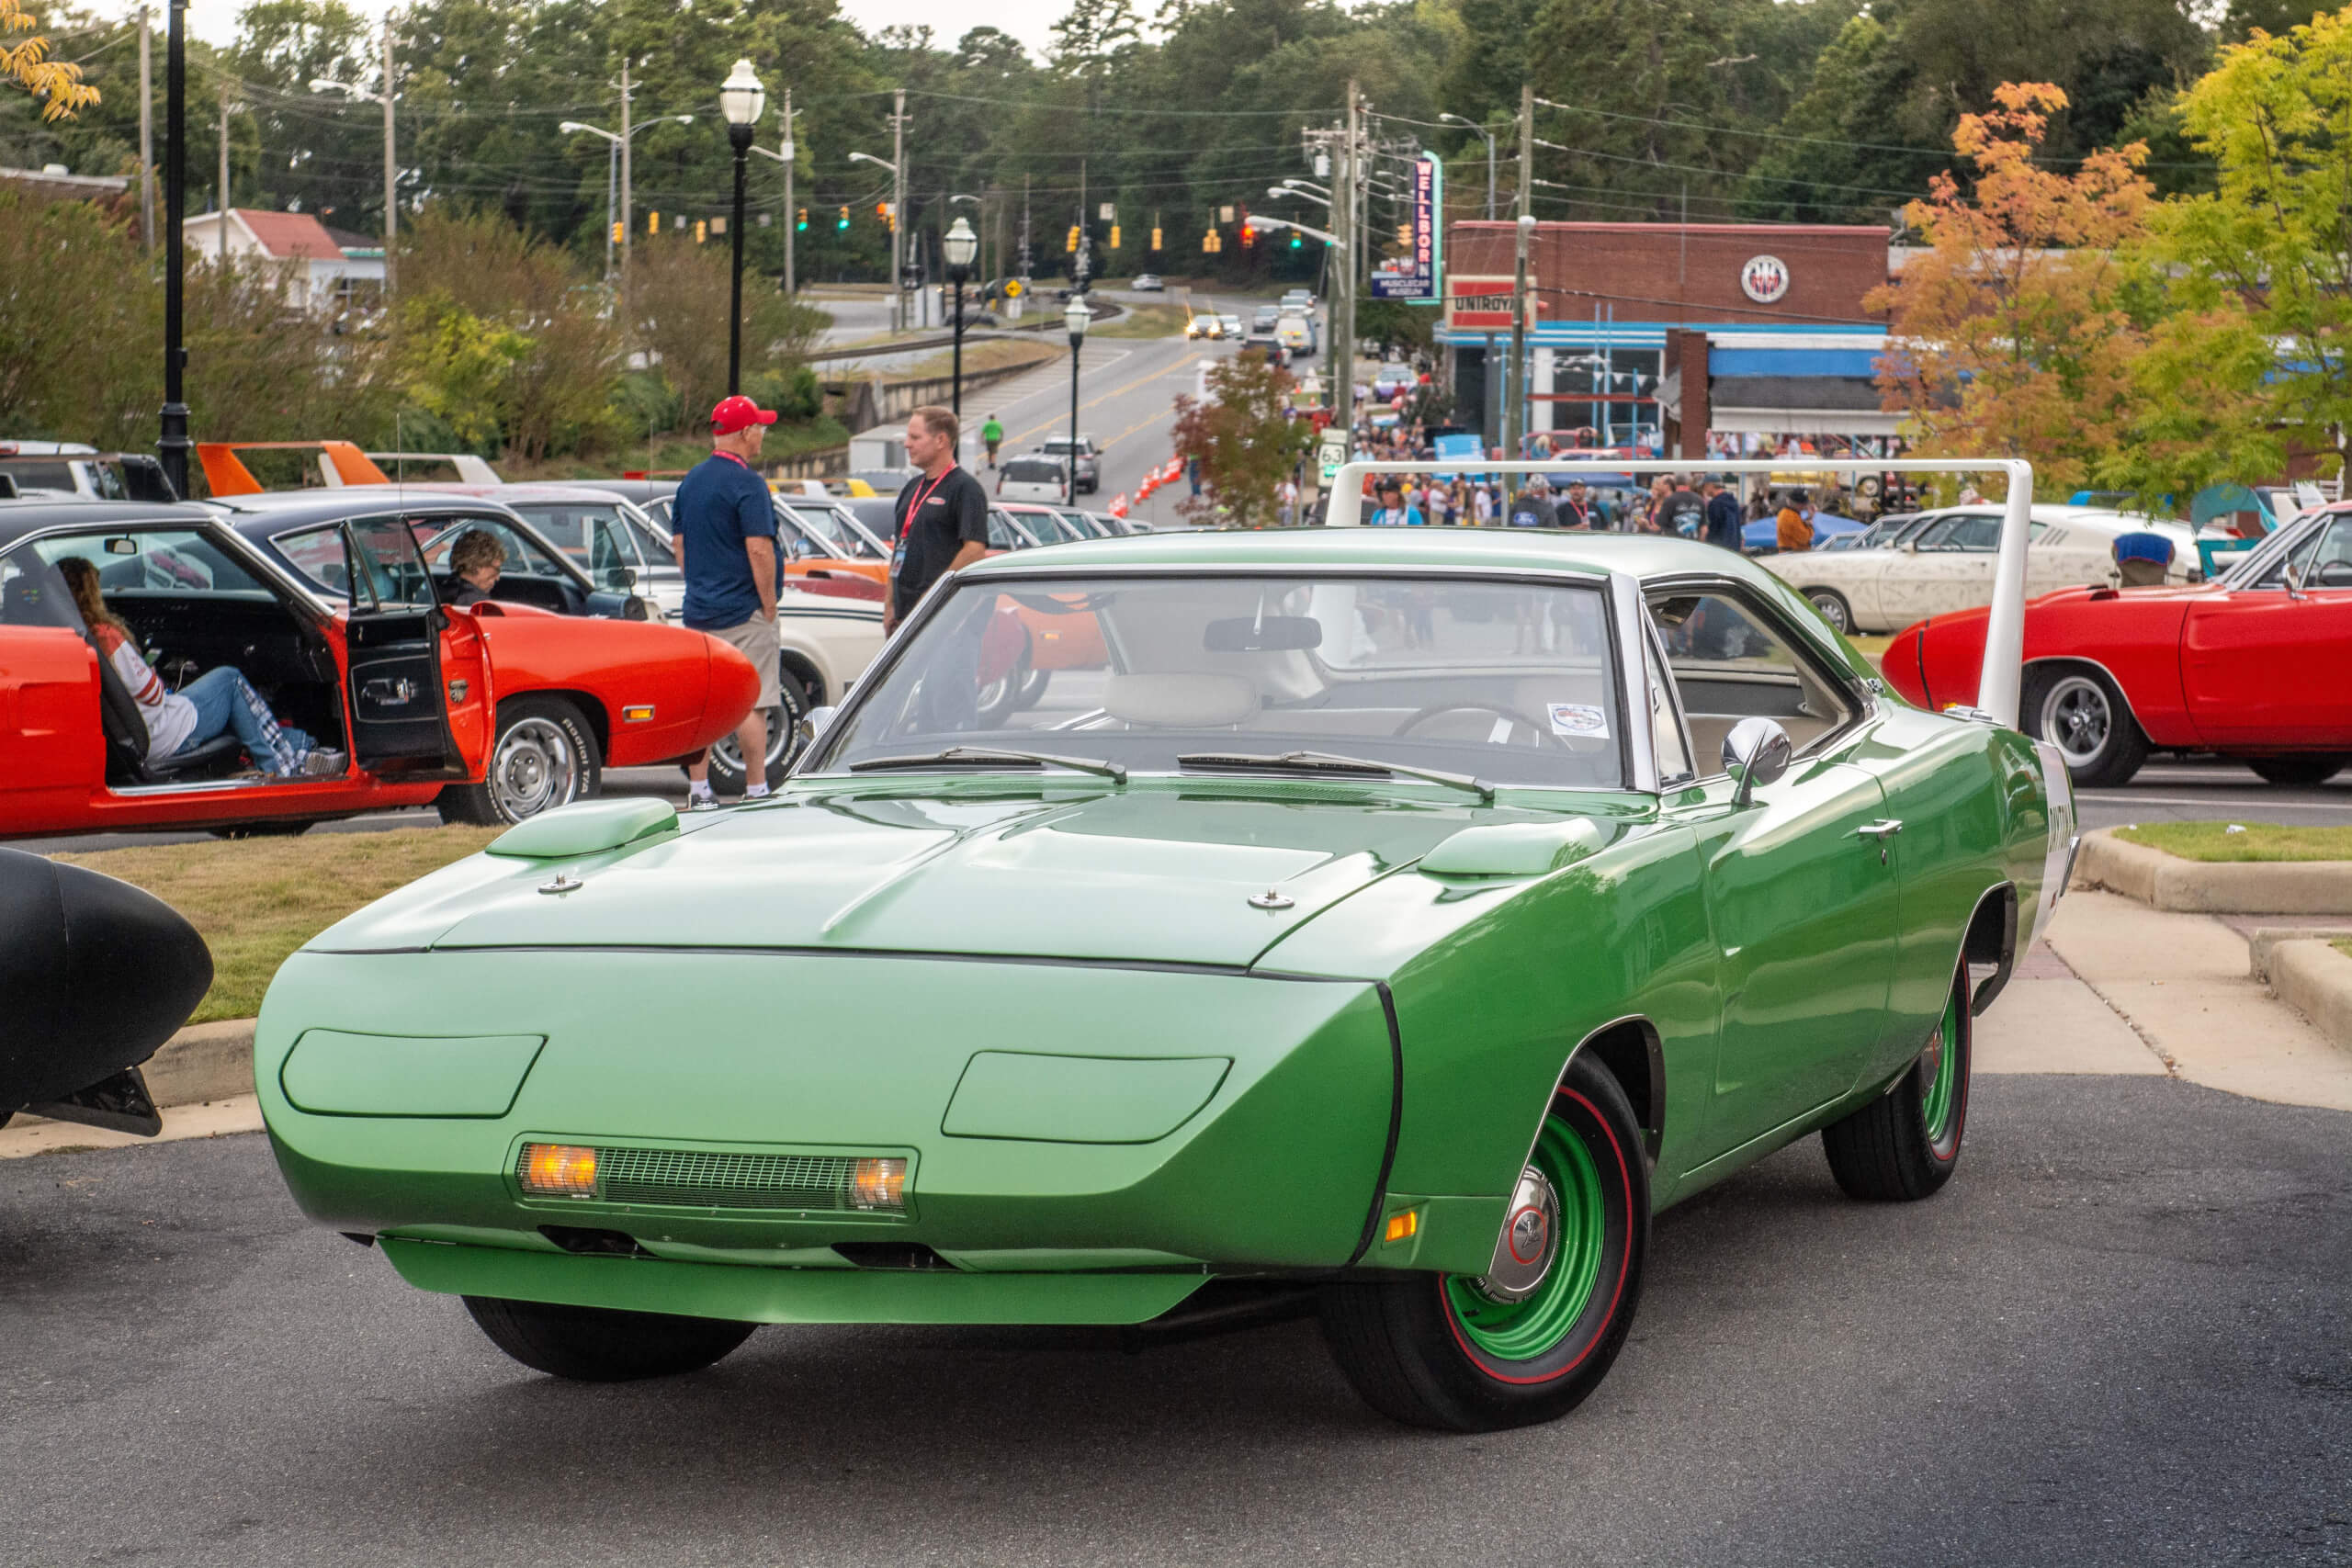 This 1969 Dodge Charger Daytona's original owner raced to see his car's debut at the 1969 Talladega Speedway.